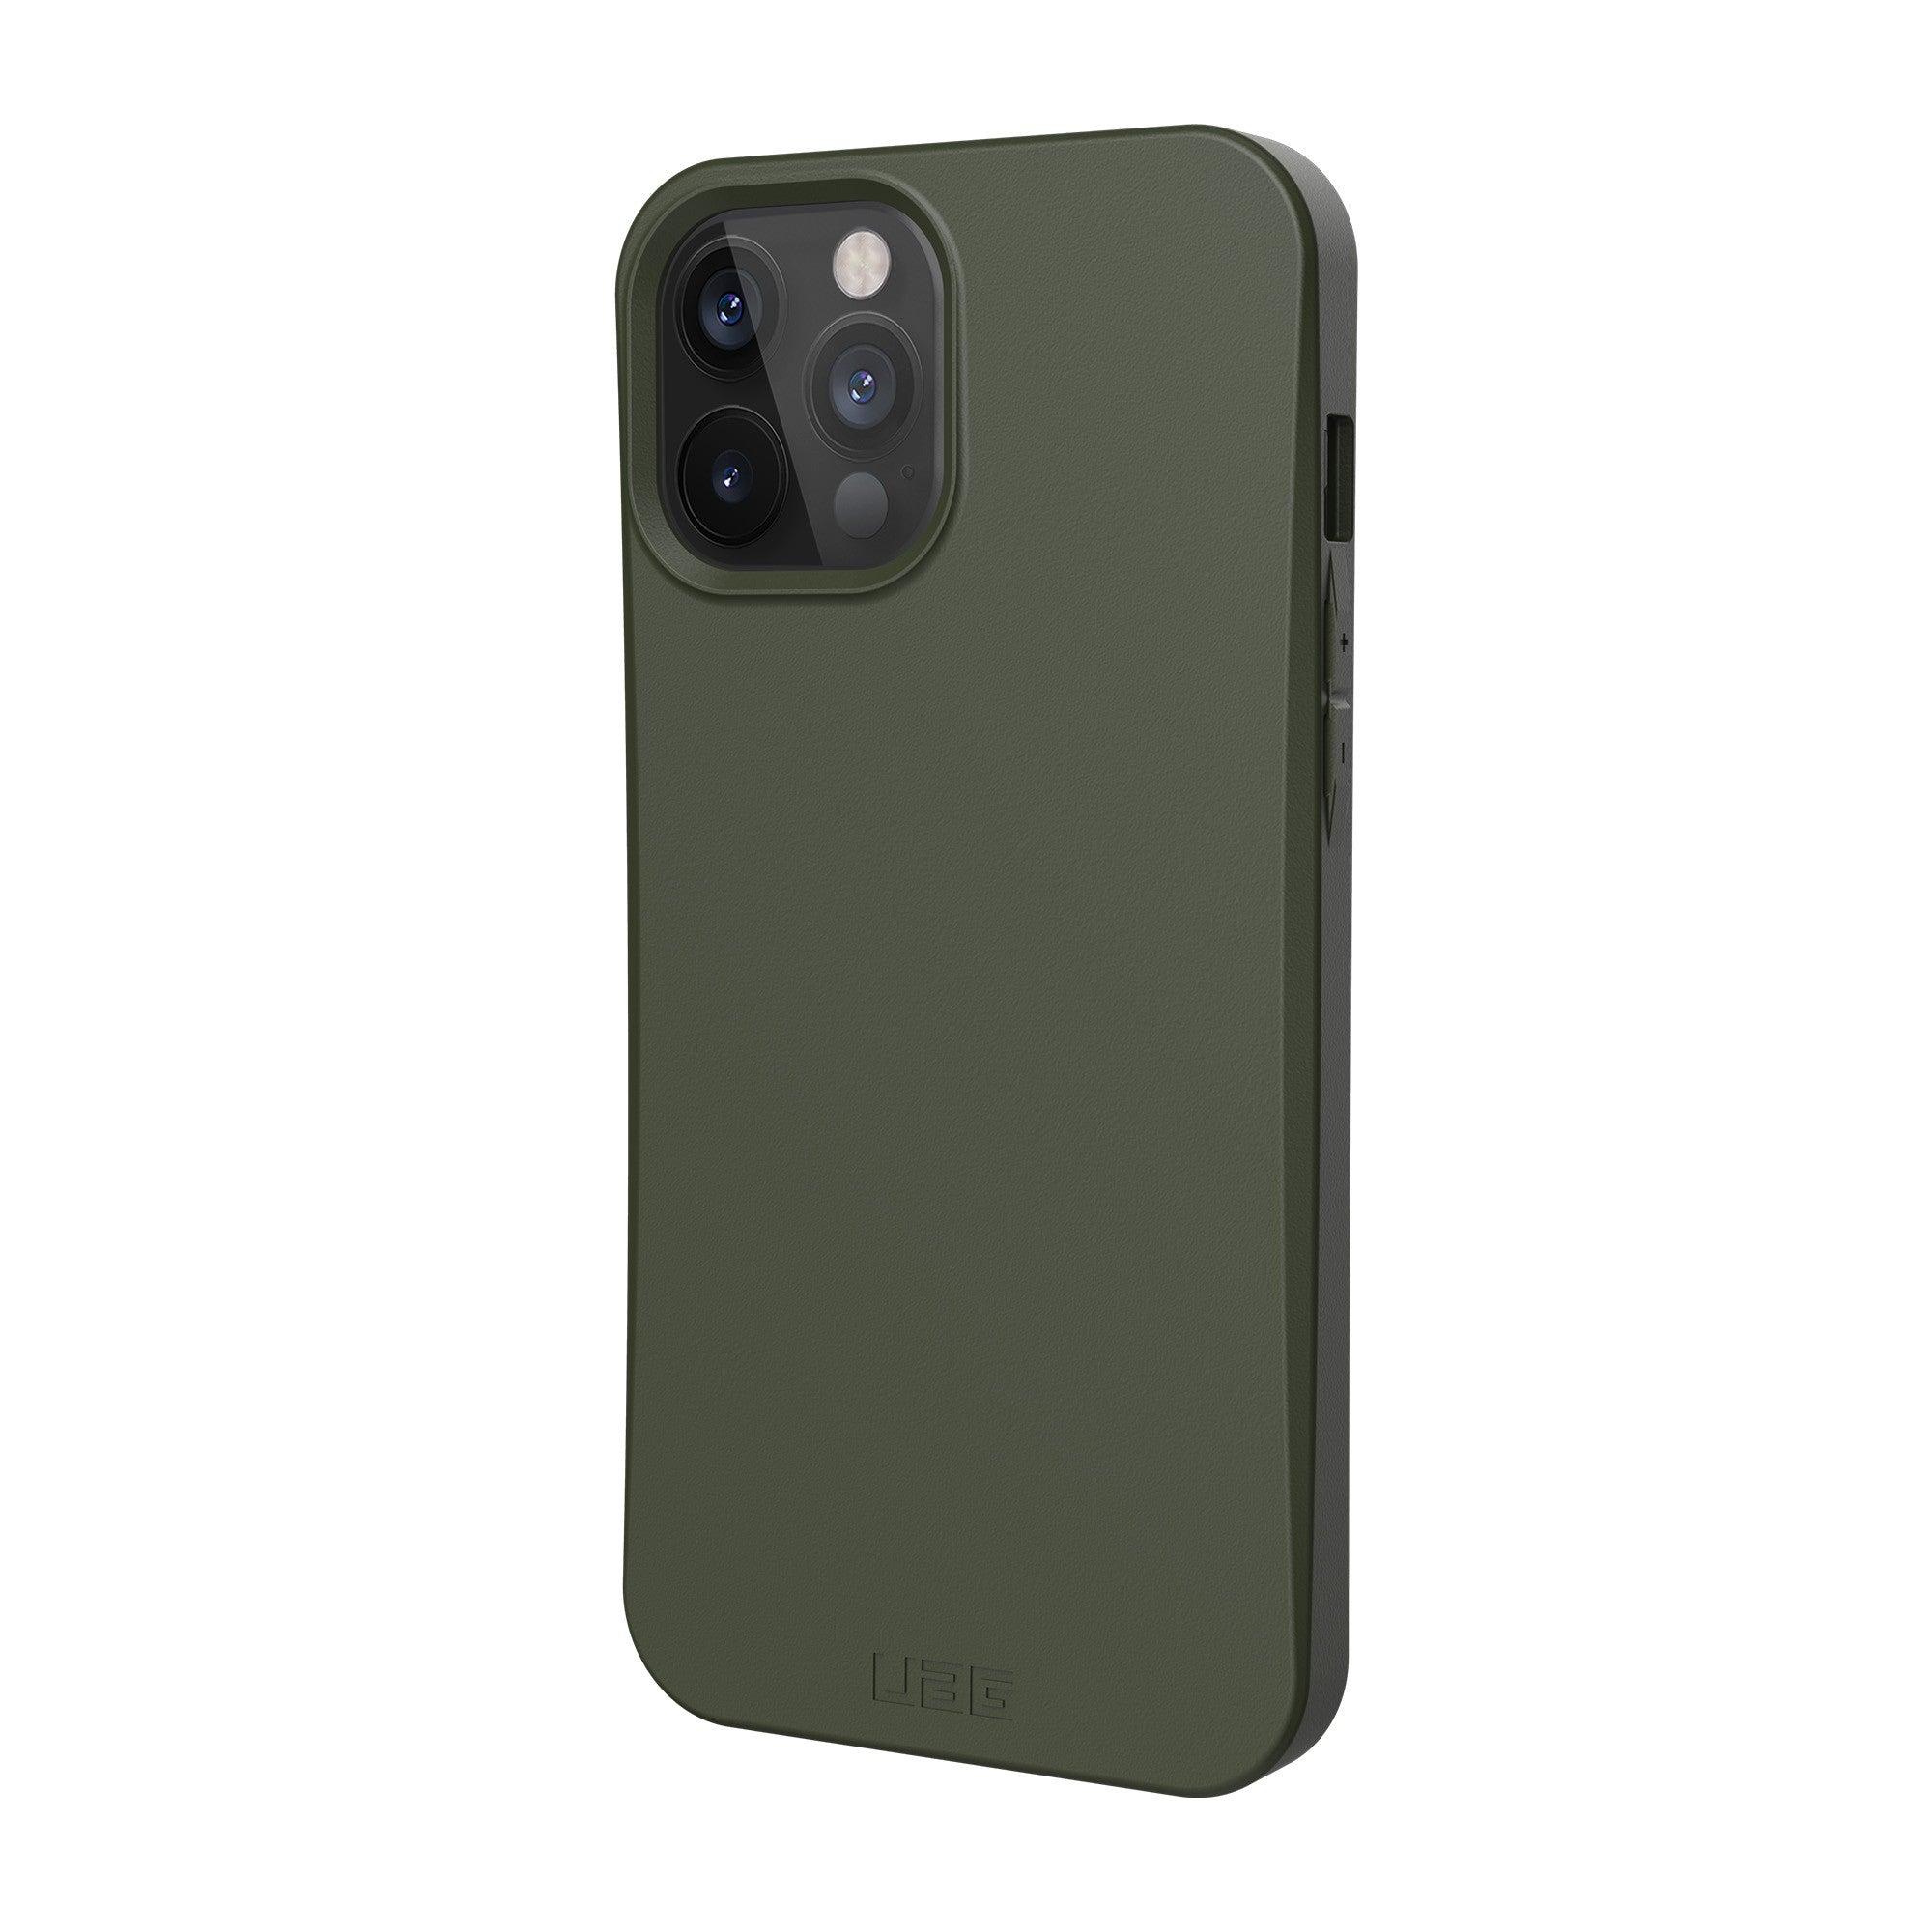 iPhone 12 Pro Max UAG Green (Olive) Outback Case - 15-07649